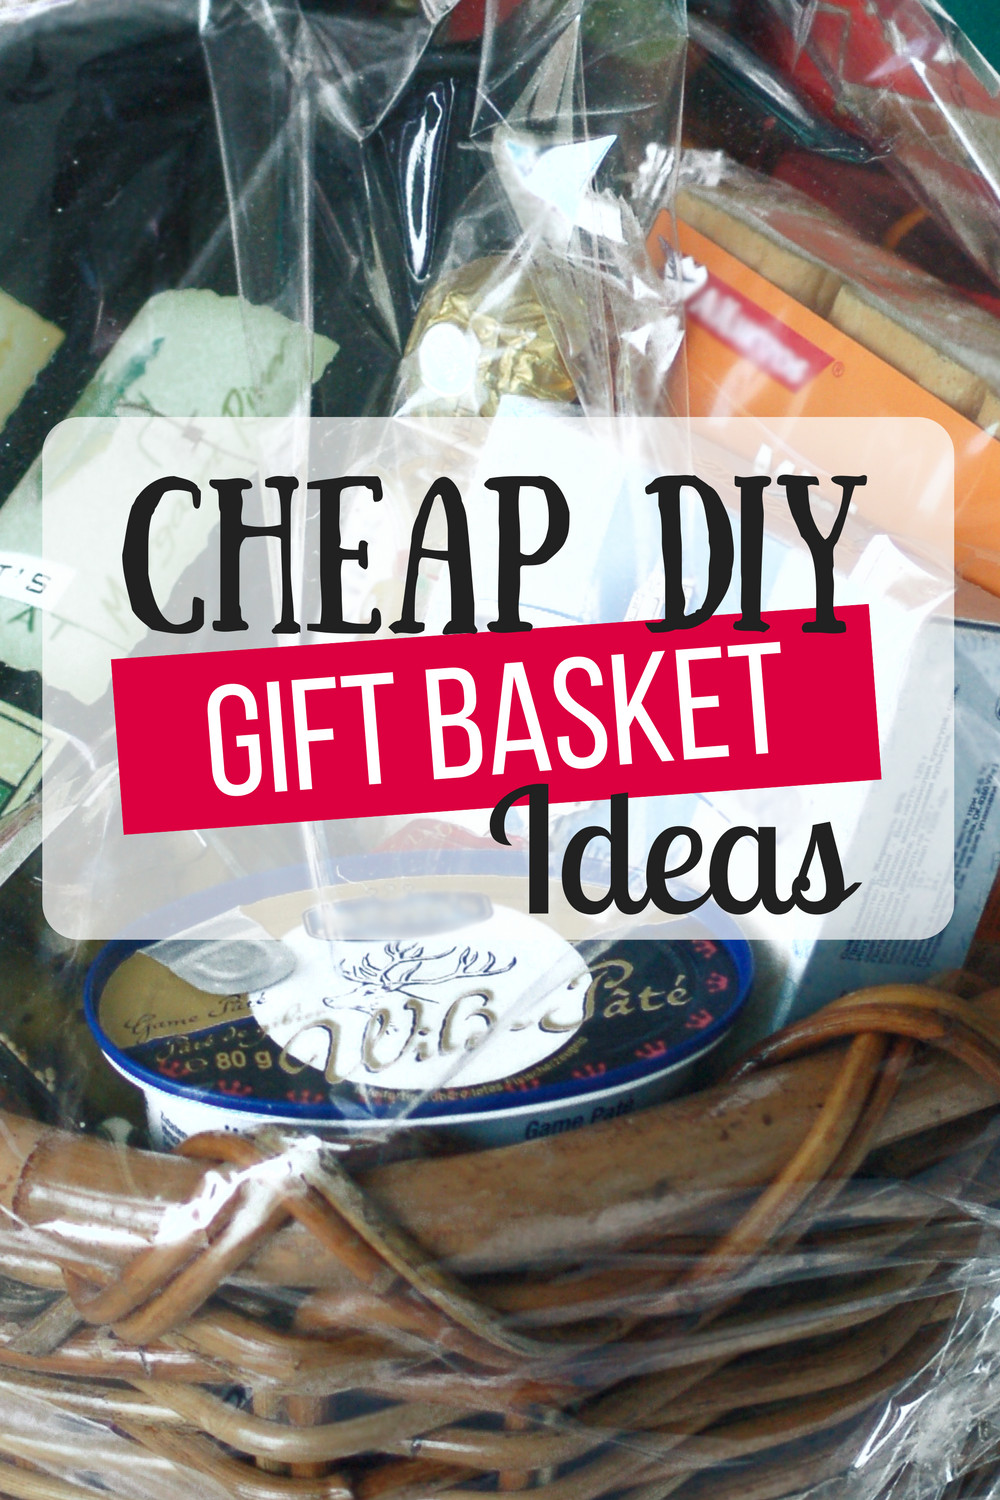 Food Basket Gift Ideas
 Cheap DIY Gift Baskets The Busy Bud er